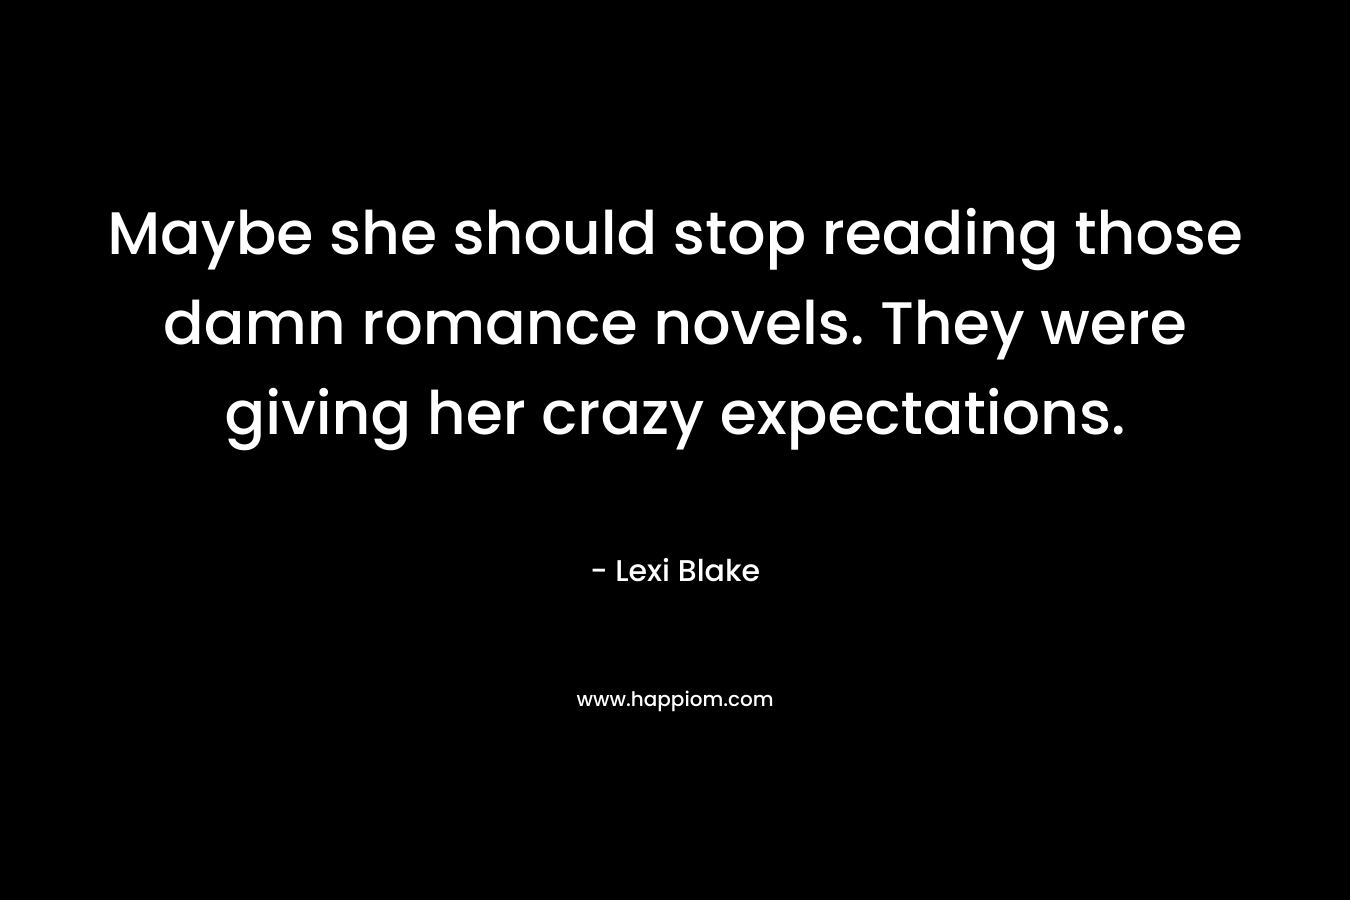 Maybe she should stop reading those damn romance novels. They were giving her crazy expectations.